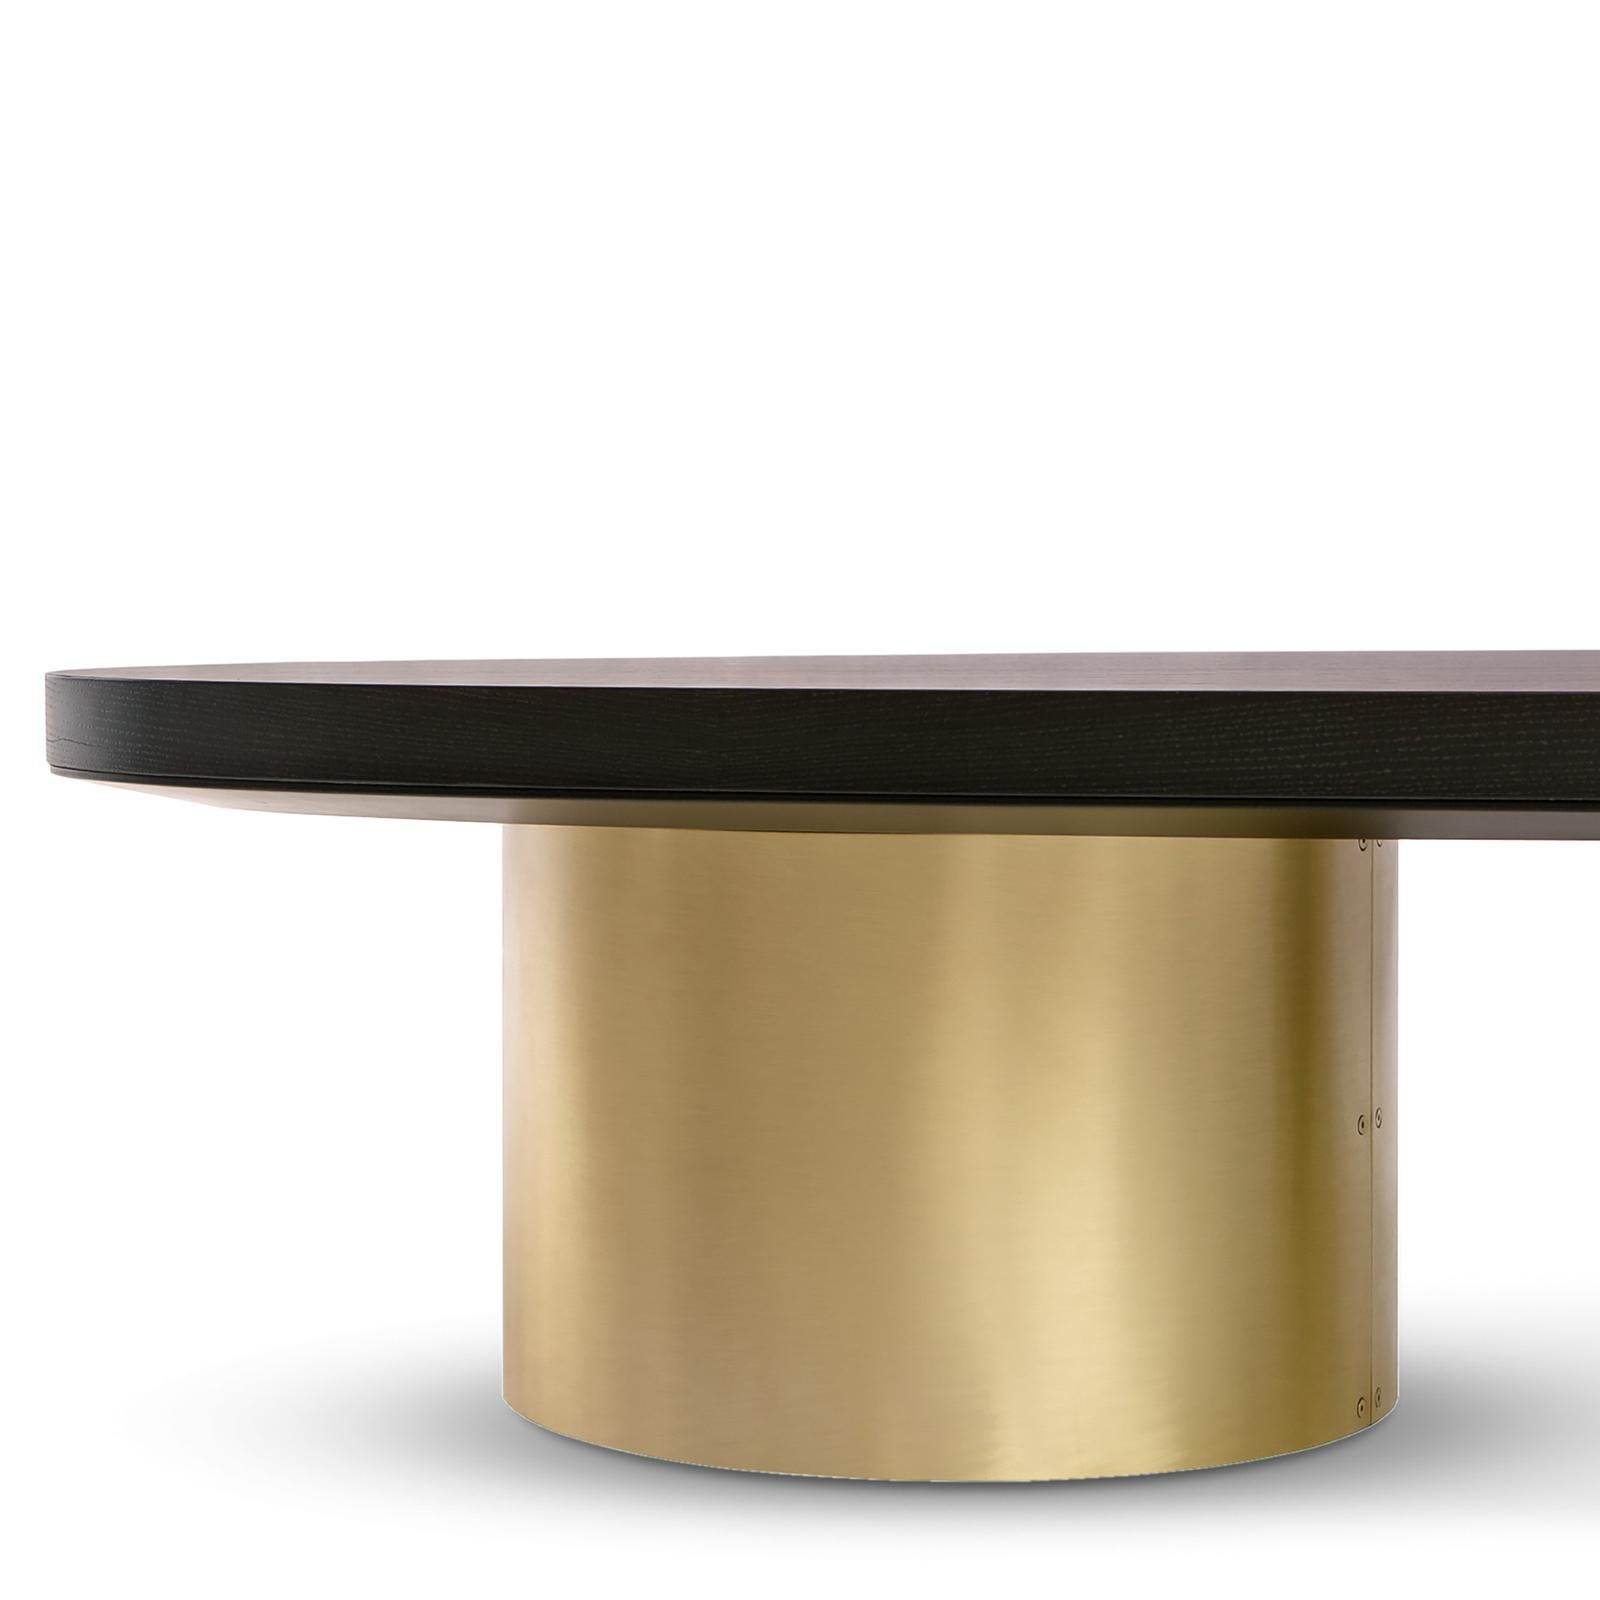 This coffee table will imbue any living room, lounge or office with mesmerizing sophistication. A combination of elegant hues, it features an oval top made of multilayered ash wood with a matte black lacquered finish. Composed of two robust,